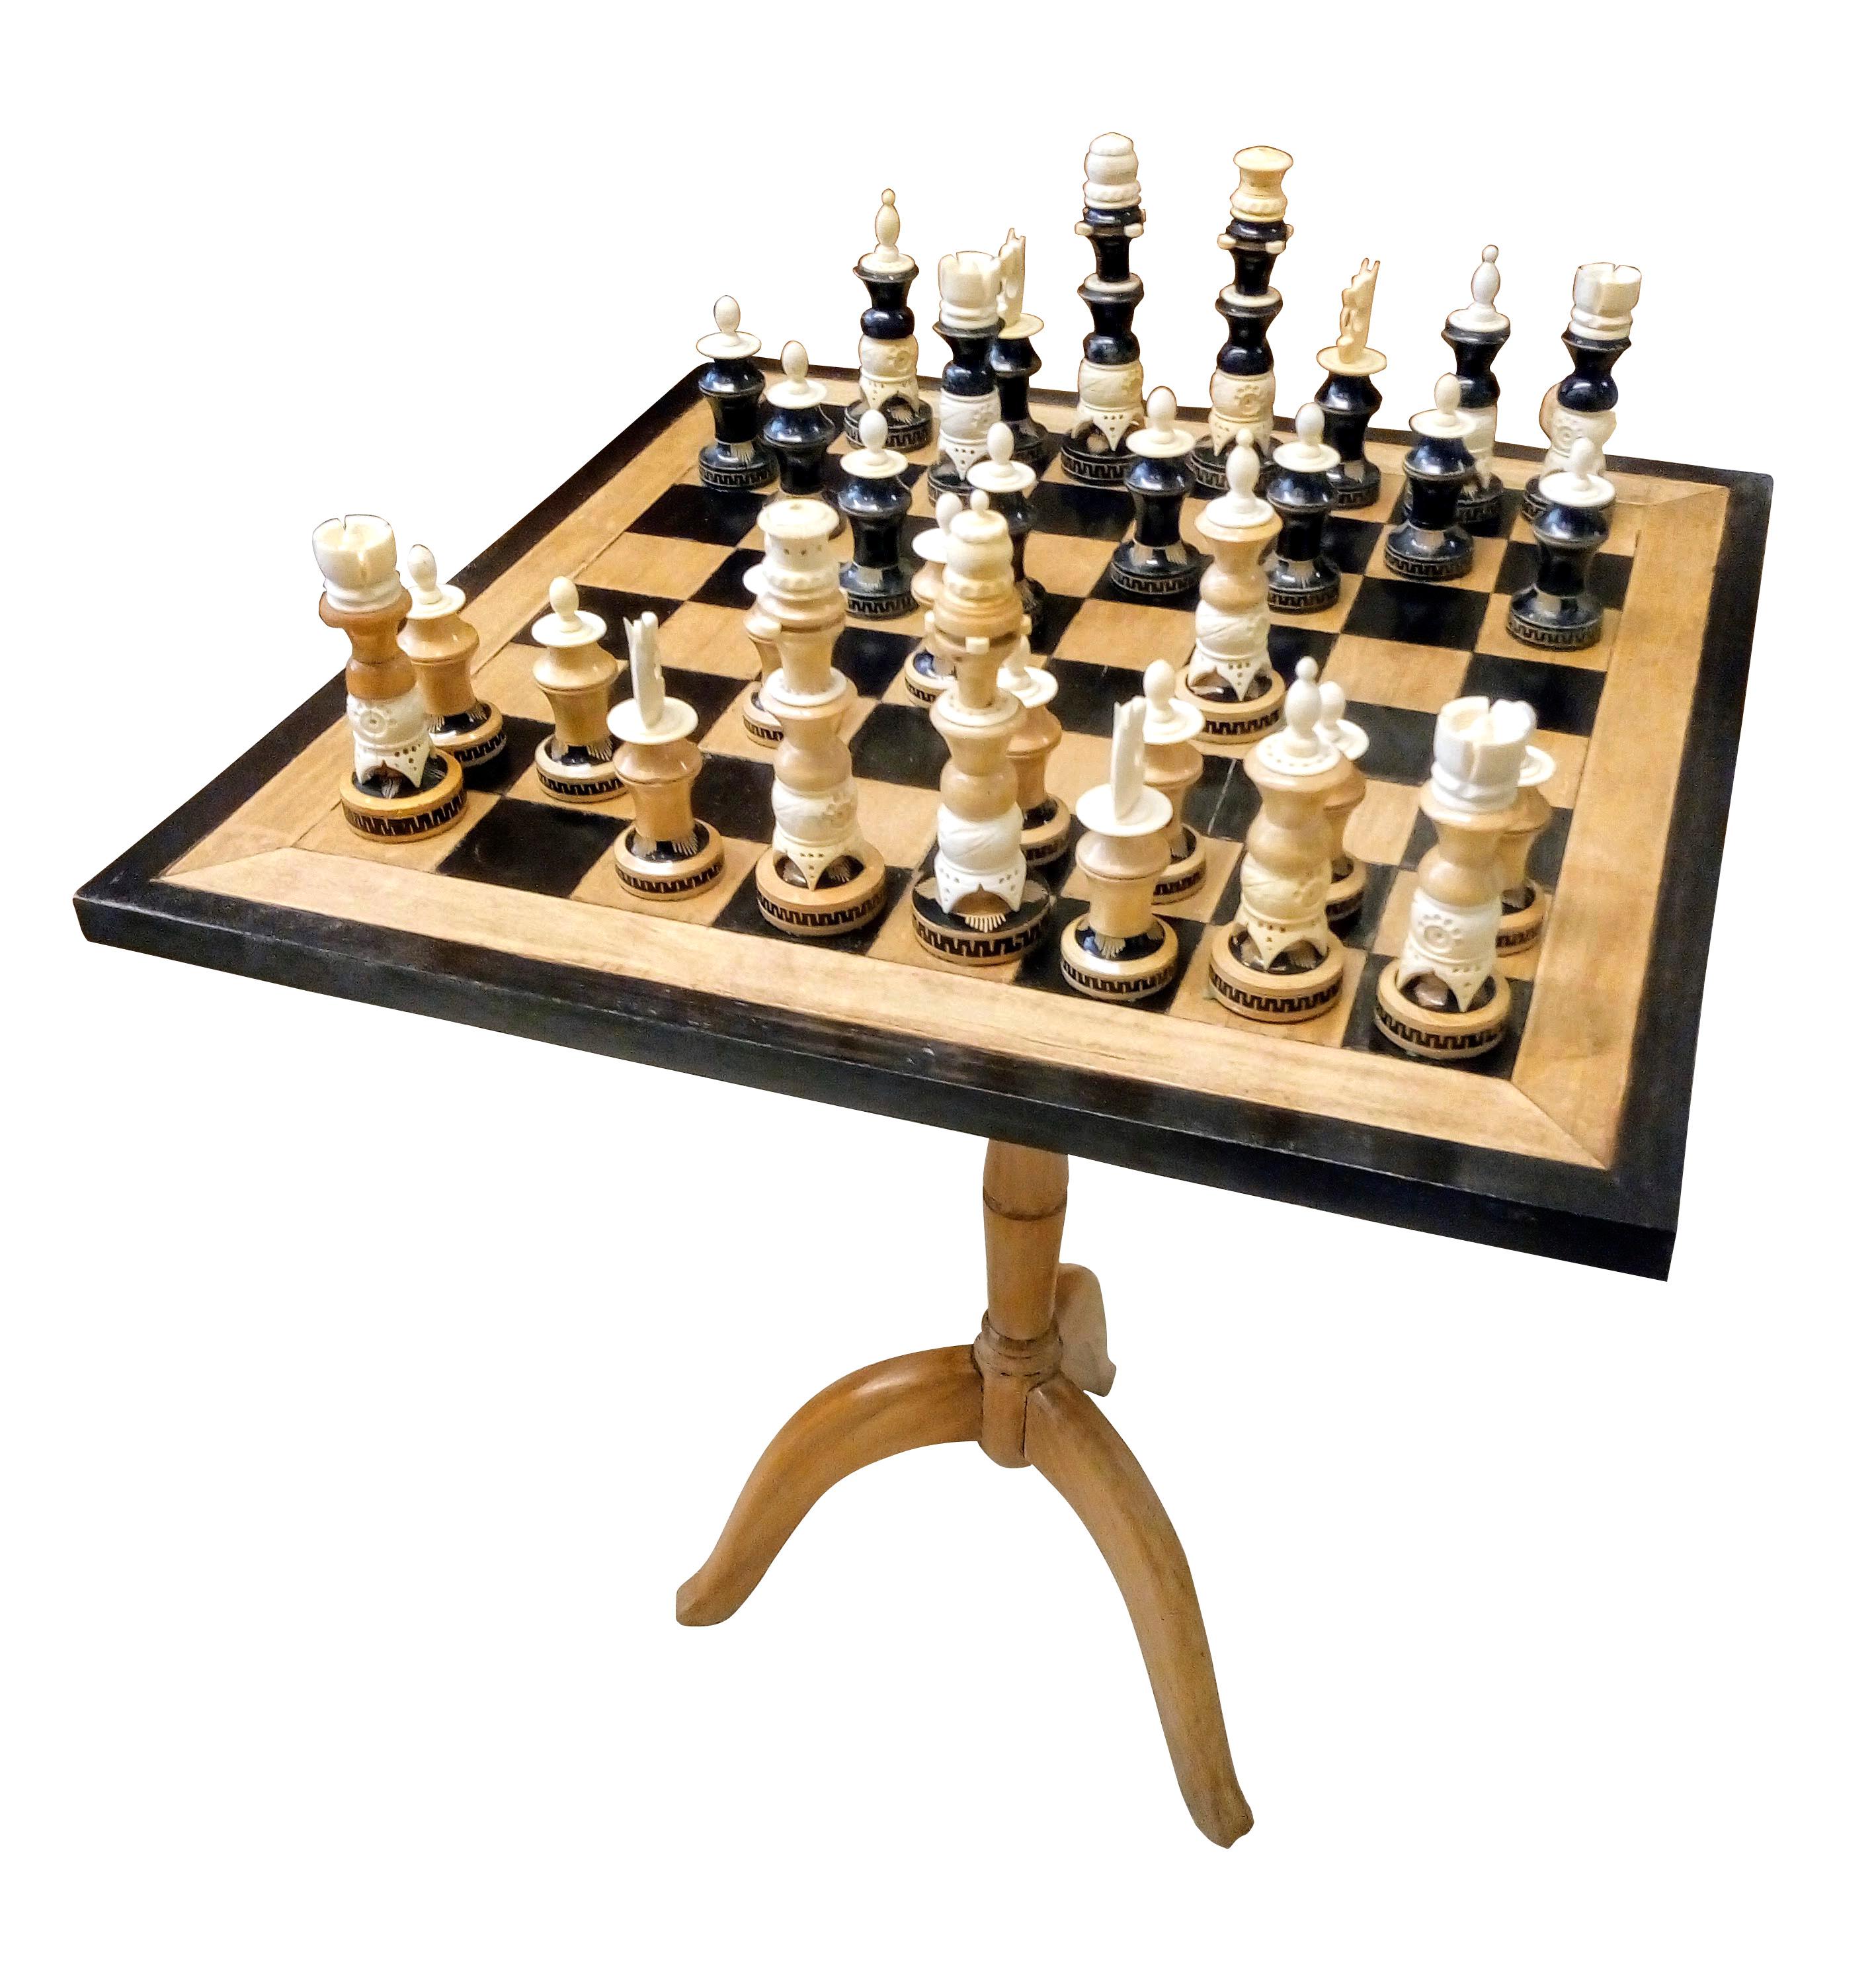 Highly artistic set of chess pieces handcrafted in wood and bone with standing wood table and board.
This set was manufactured in Michoacán State, Mexico circa 1970, 16 pieces have the natural original light wood finish, while the rest 16 are dyed